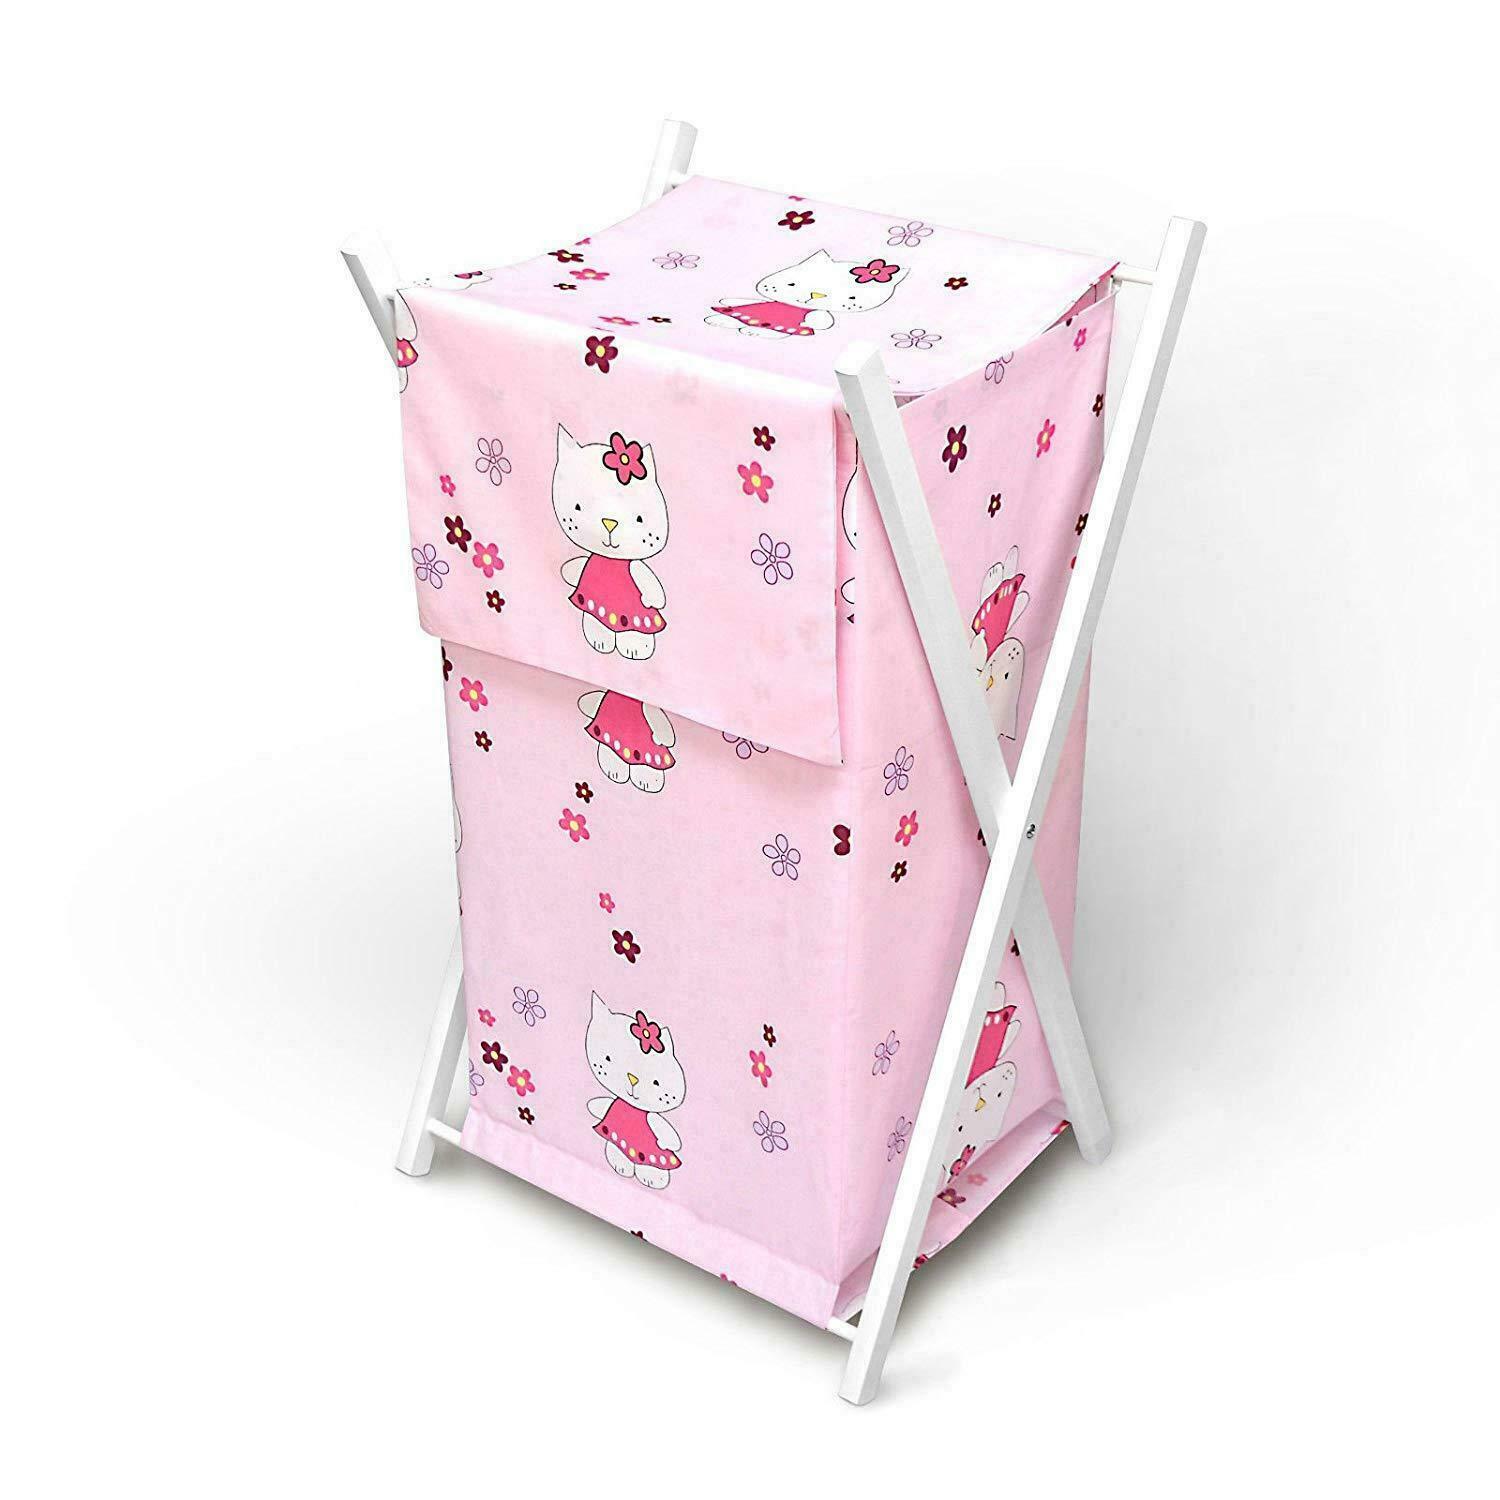 Laundry Basket with white wooden frame and storage removable linen HELLO KITTY